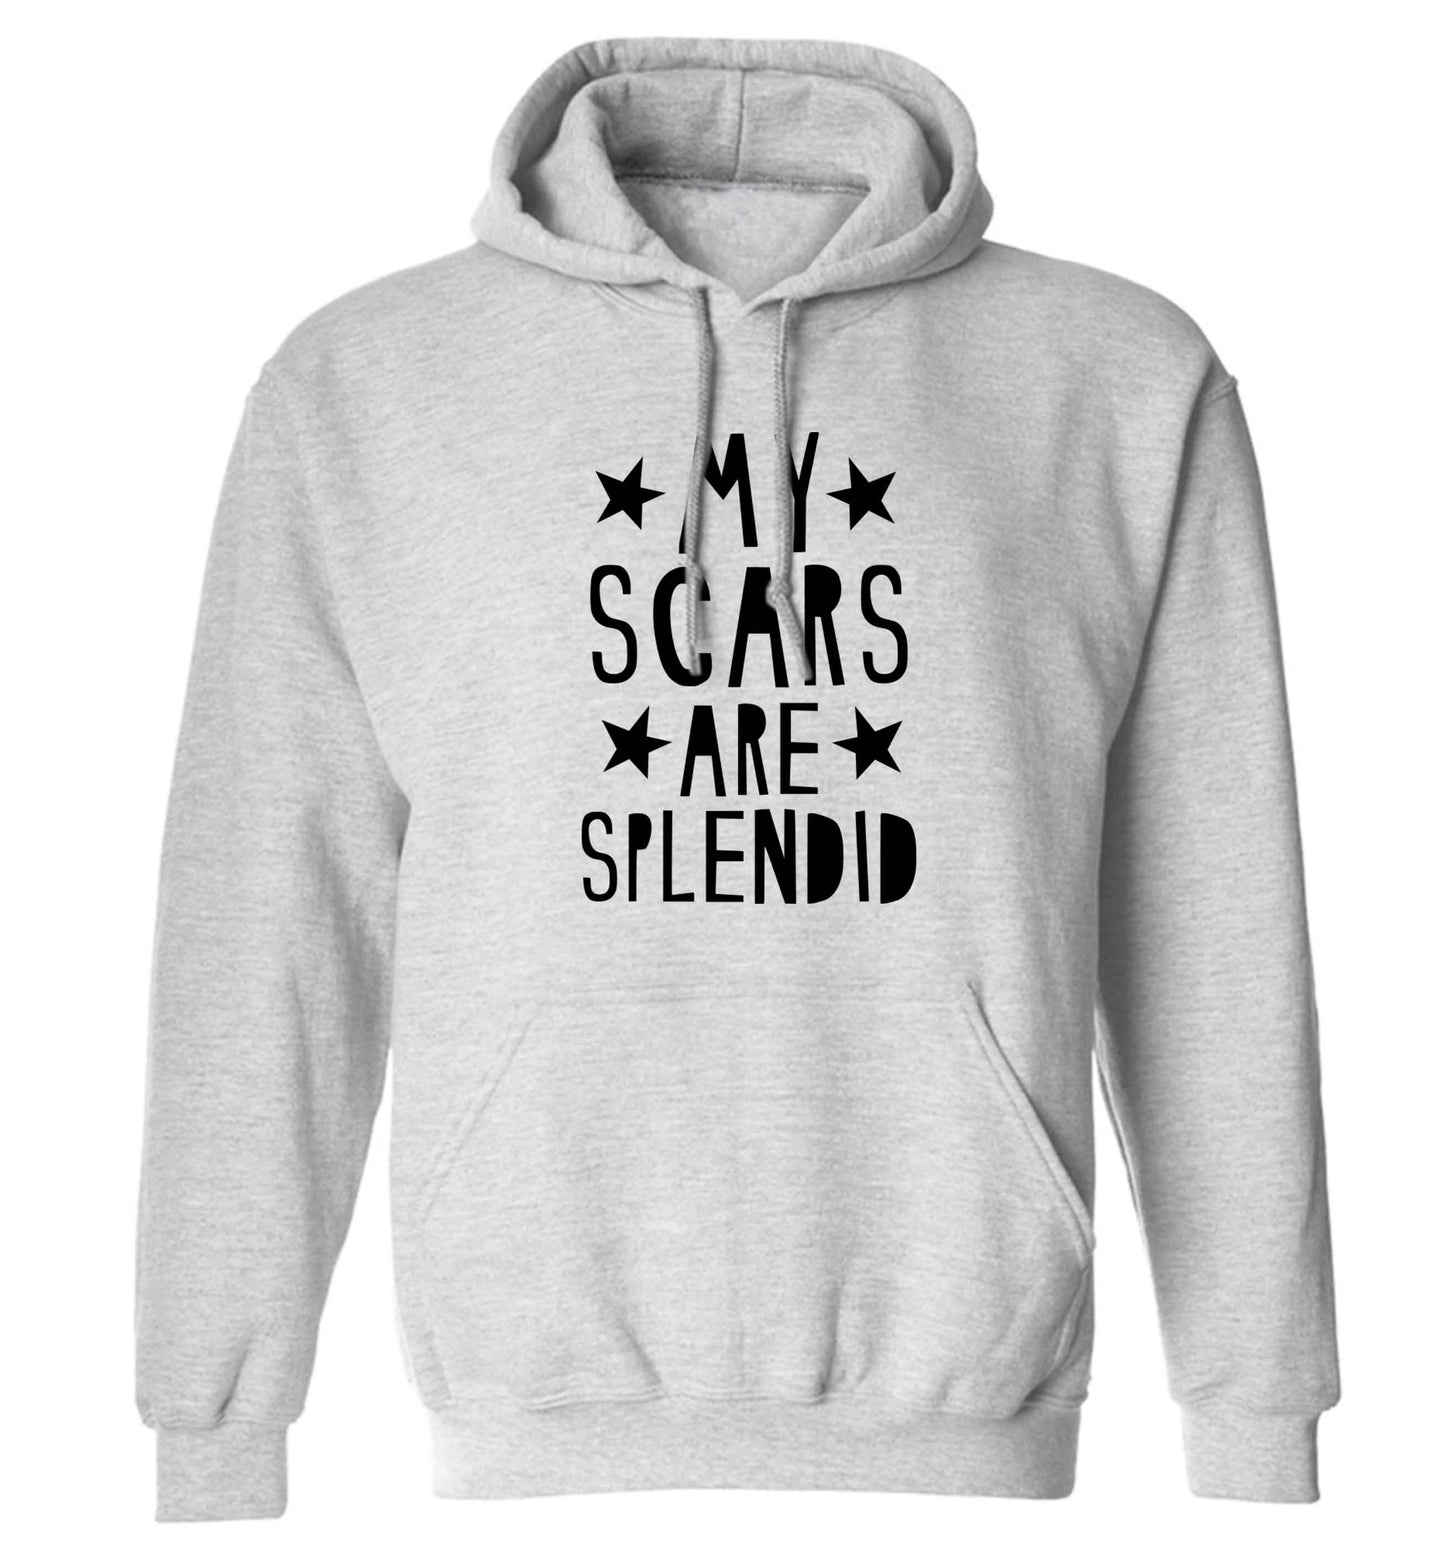 My scars are beautiful adults unisex grey hoodie 2XL